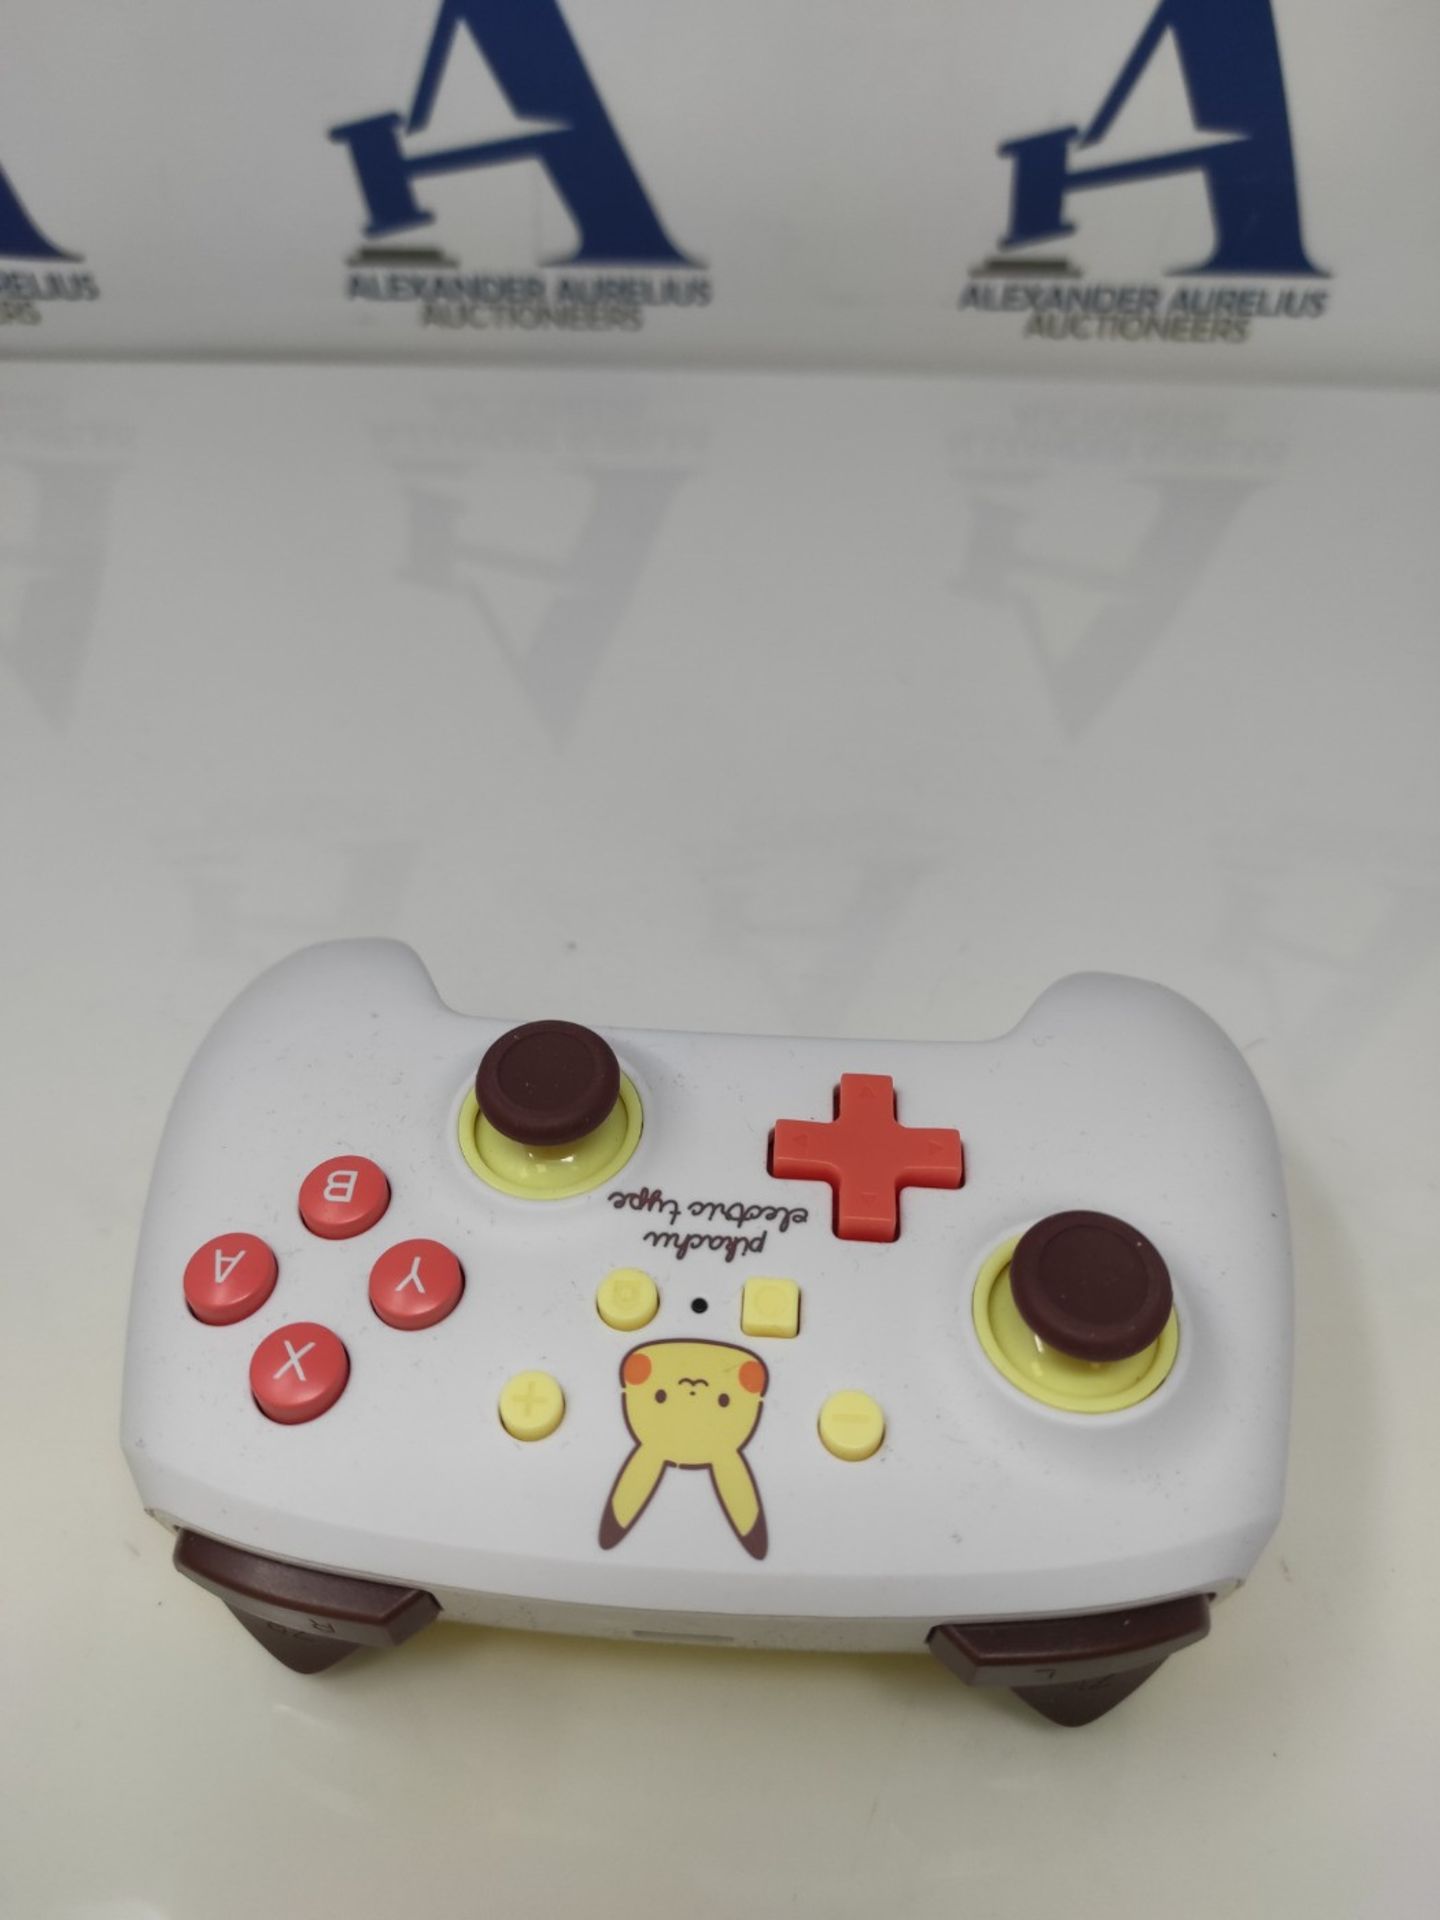 PowerA Improved wired controller for Nintendo Switch - Pikachu Electric Type - Image 3 of 3